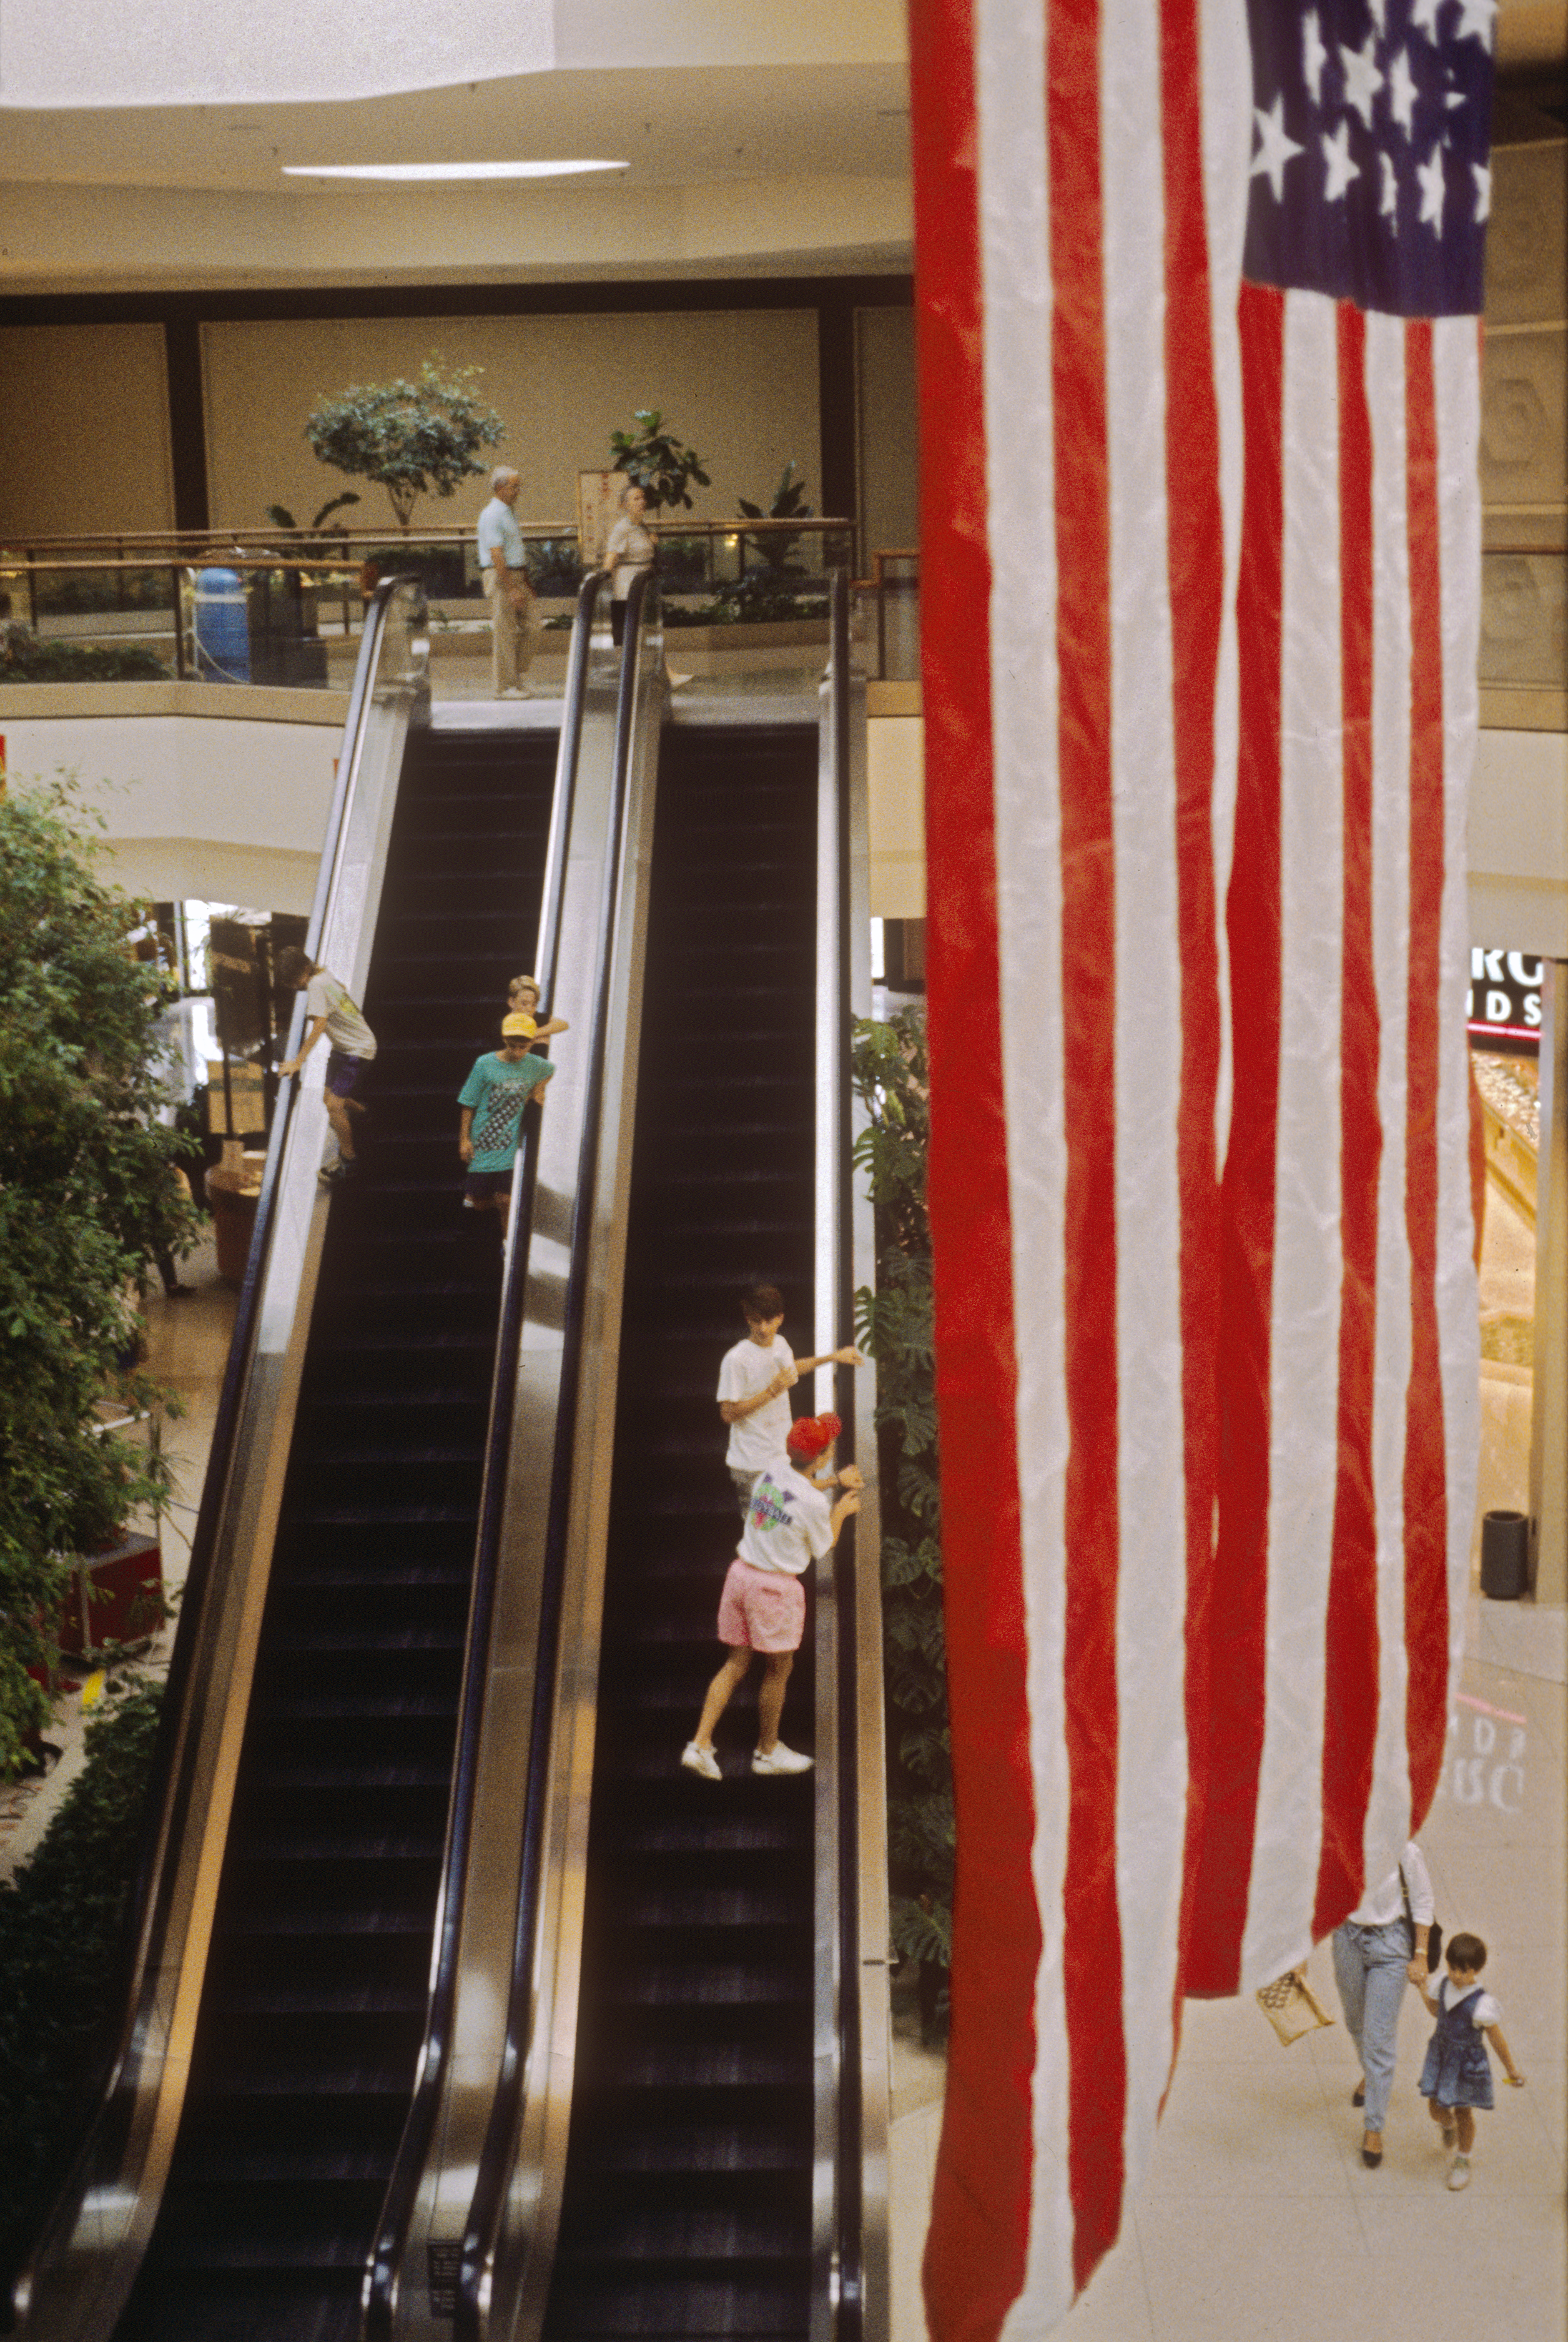 A mall escalator with the American flag in the foreground